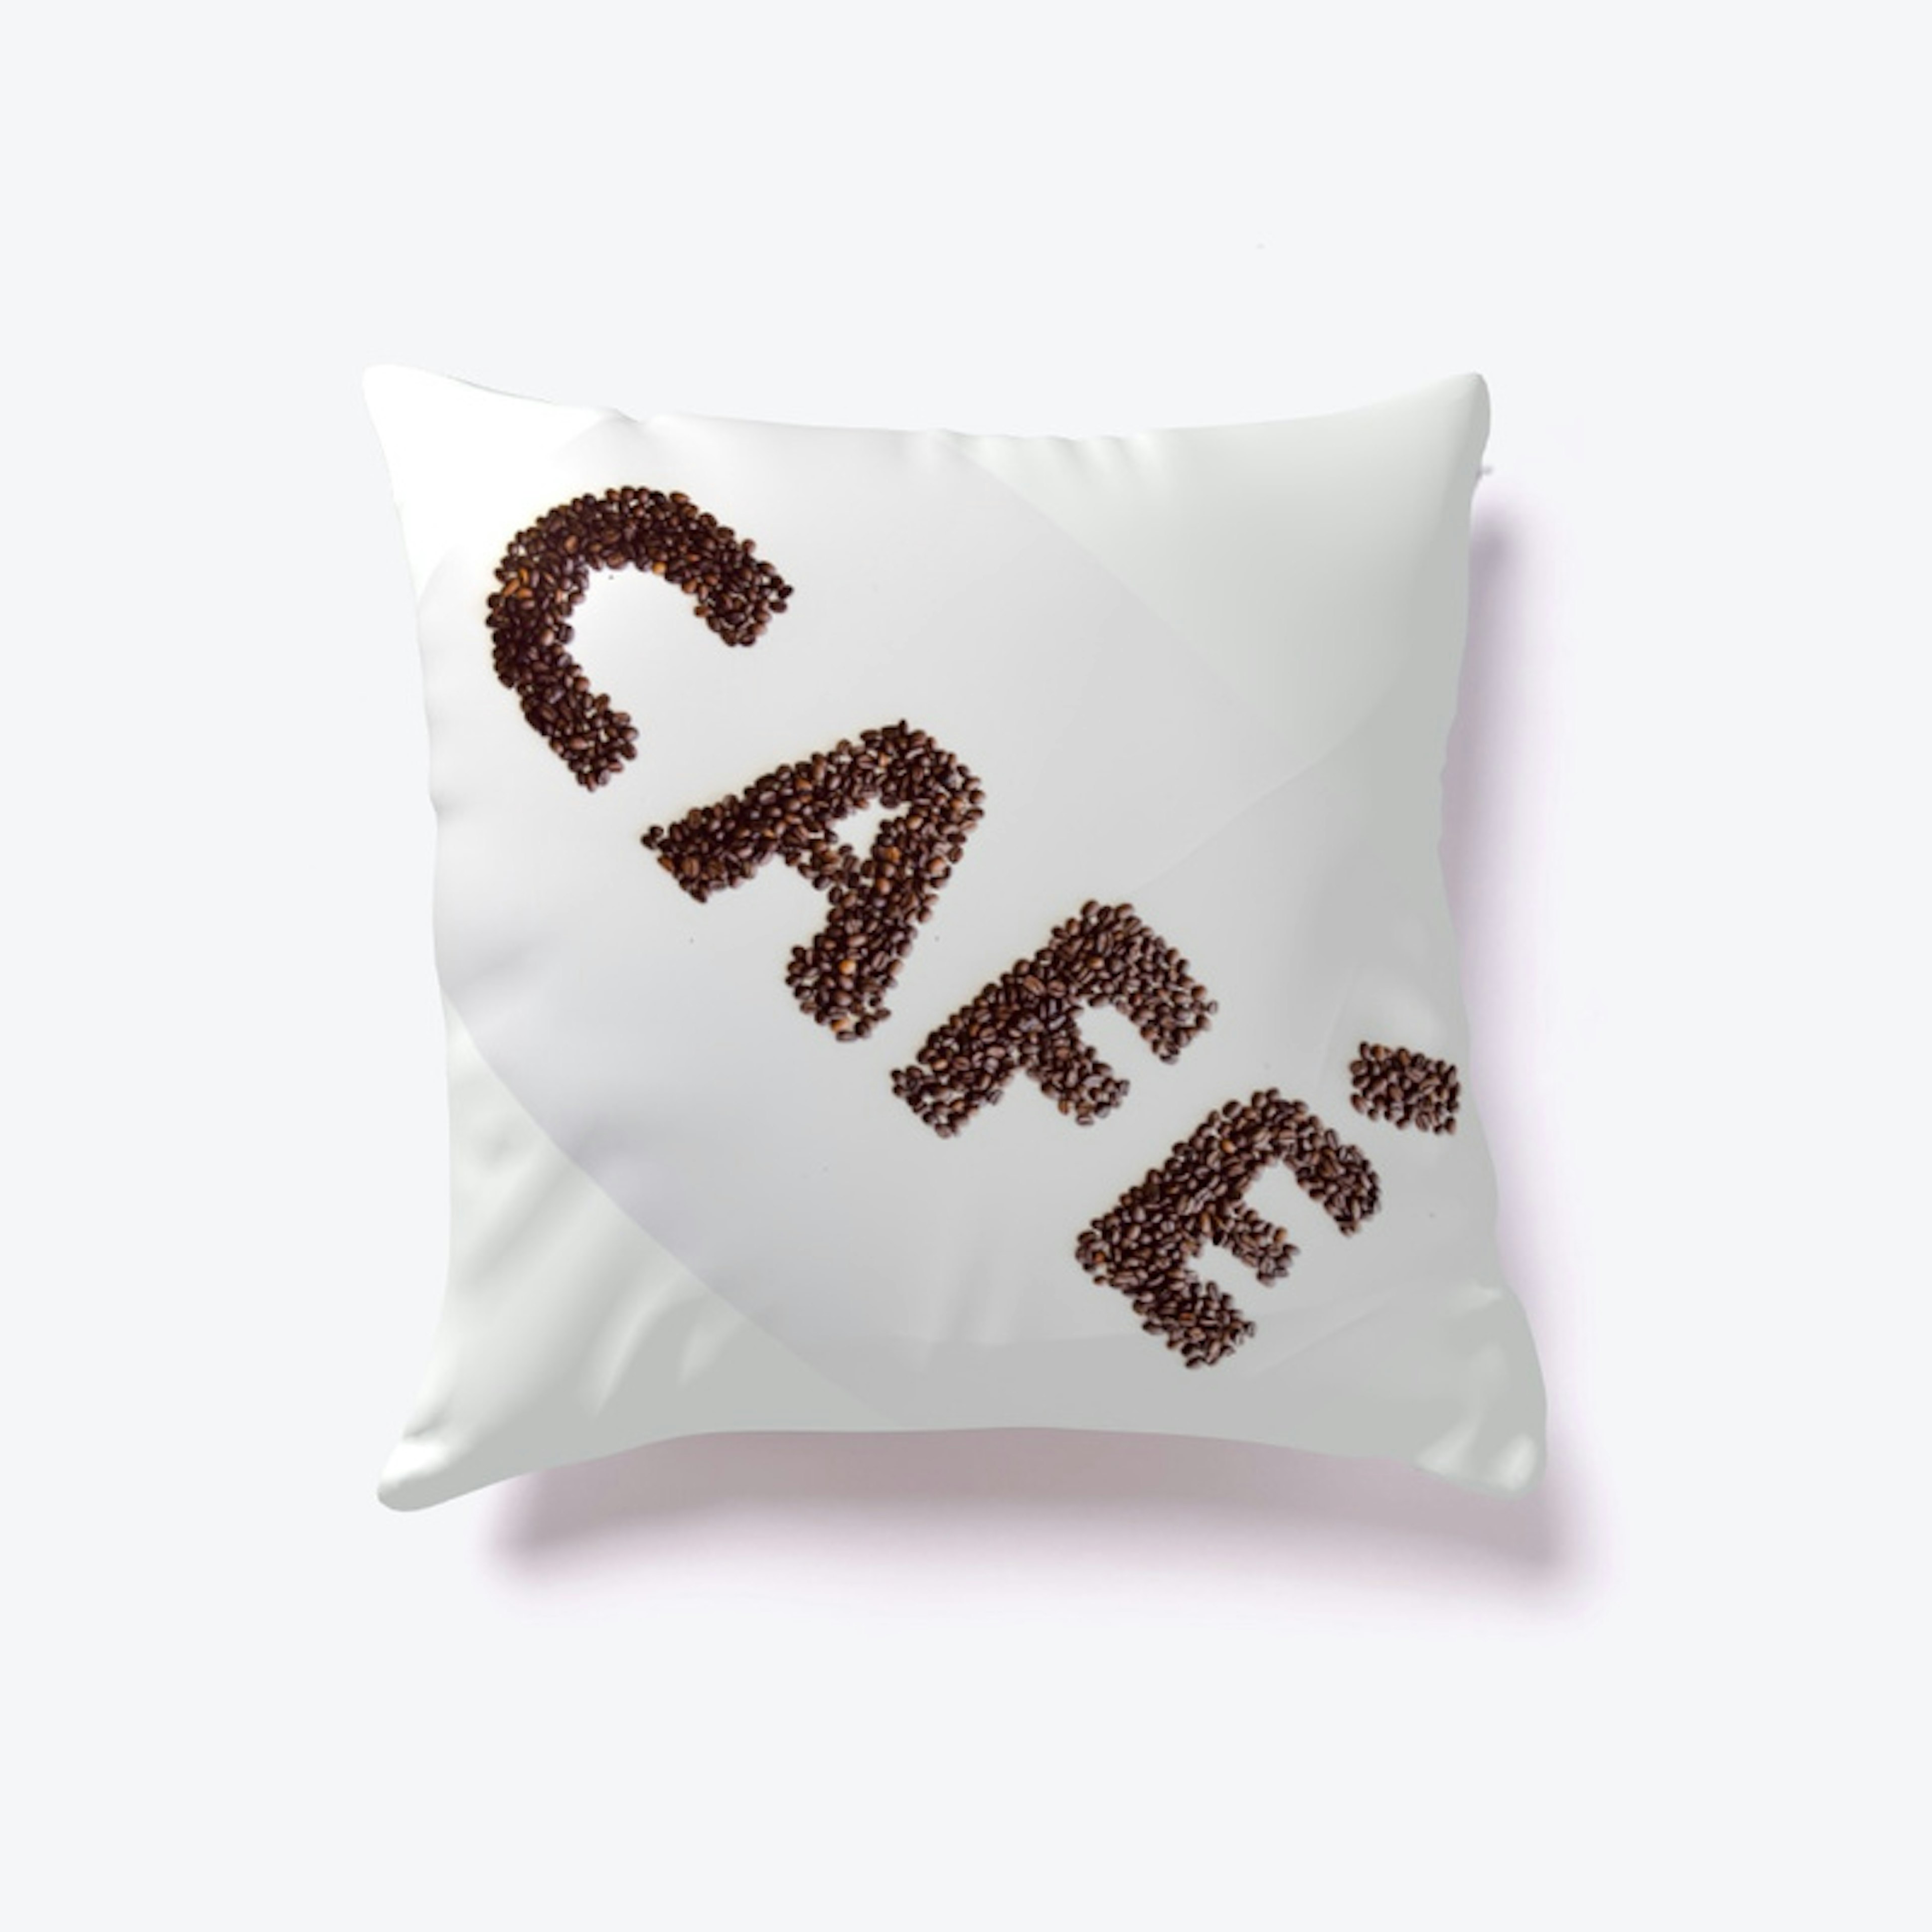 Coffee Pillows - Relax